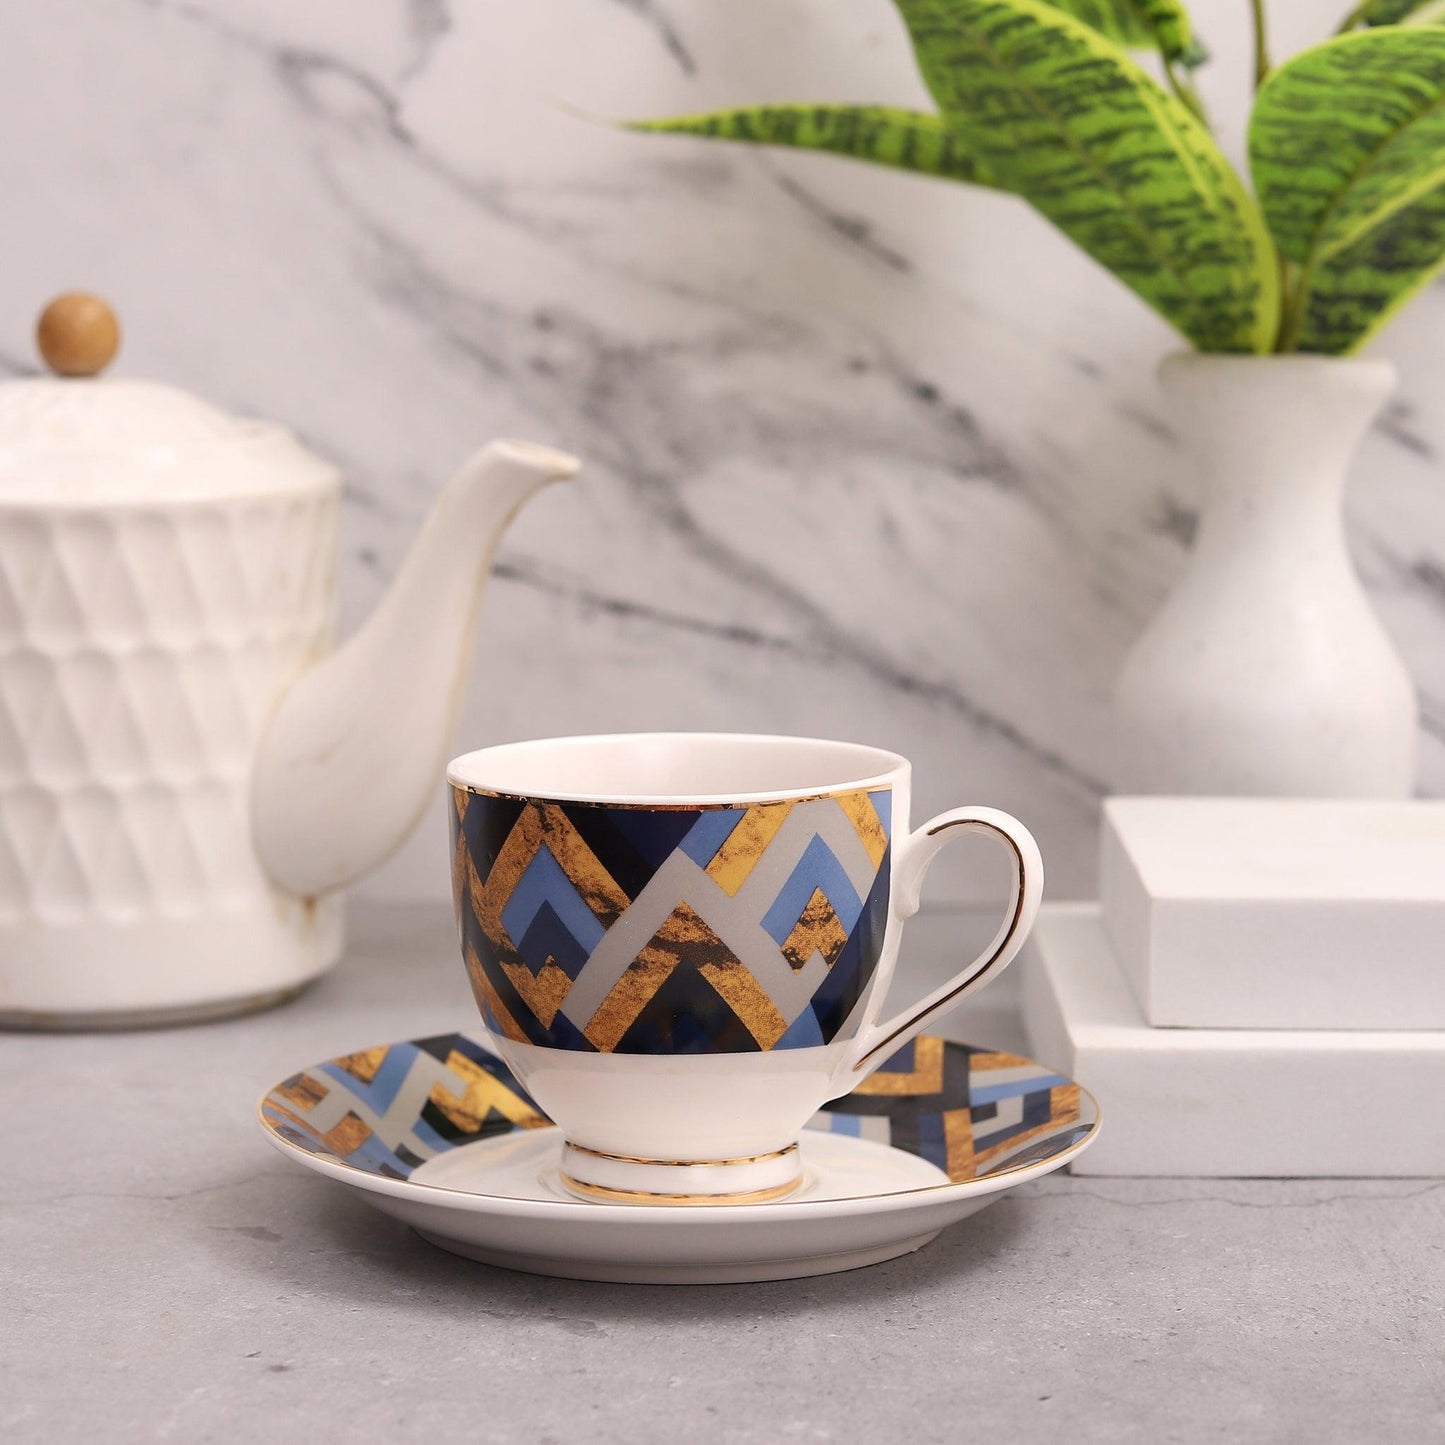 Zigzag cups with saucer (Set of 6 Cups and 6 Saucers) - Amora Crockery